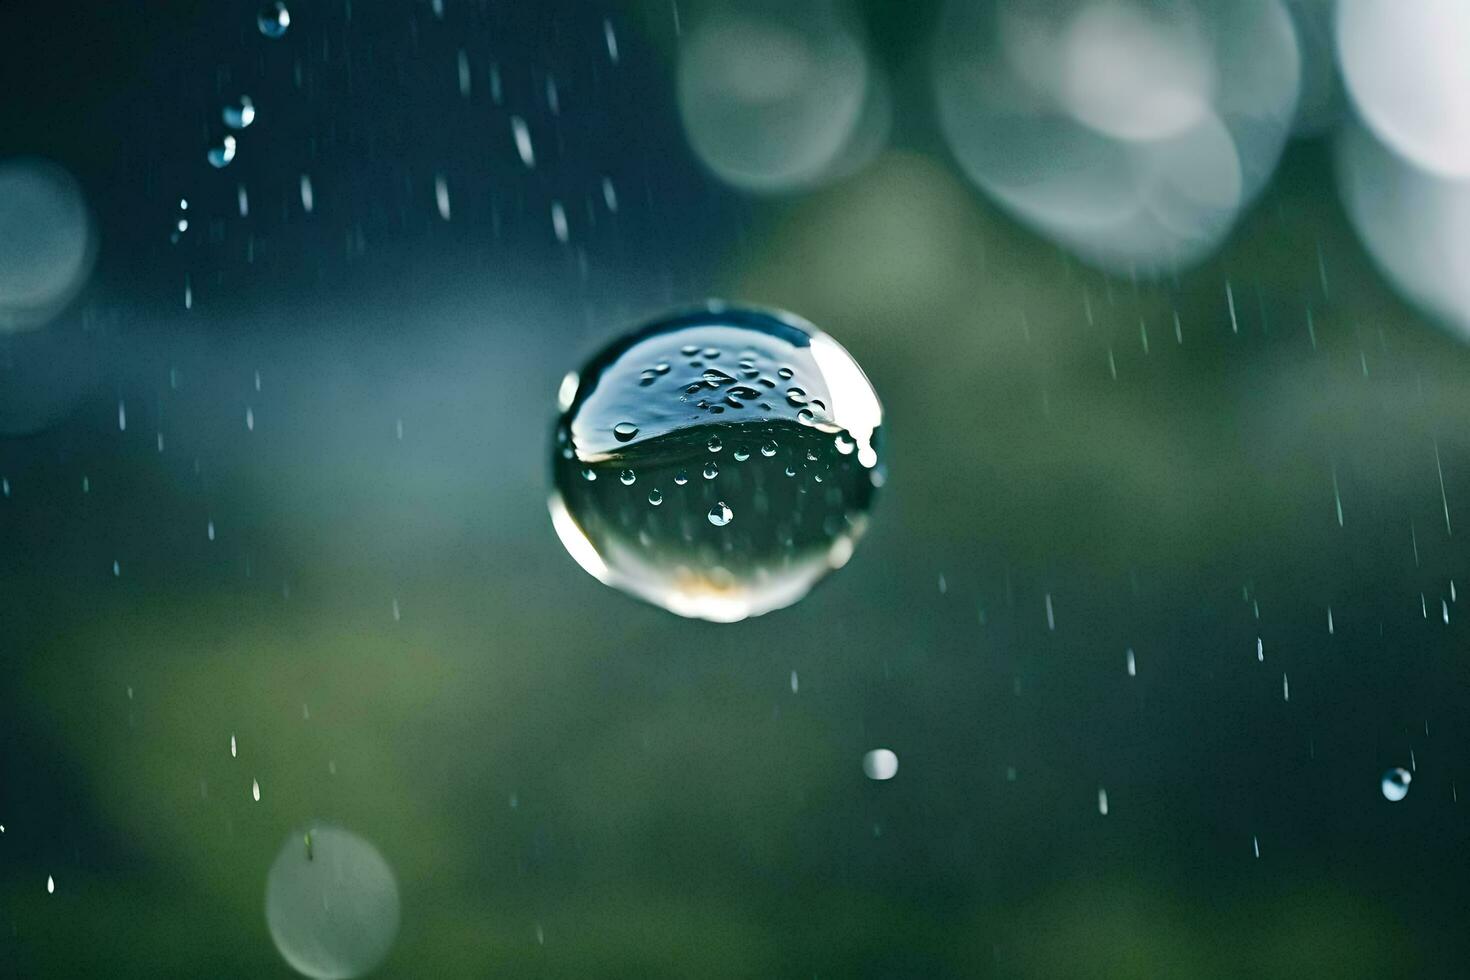 AI generated a drop of water is shown in the rain photo